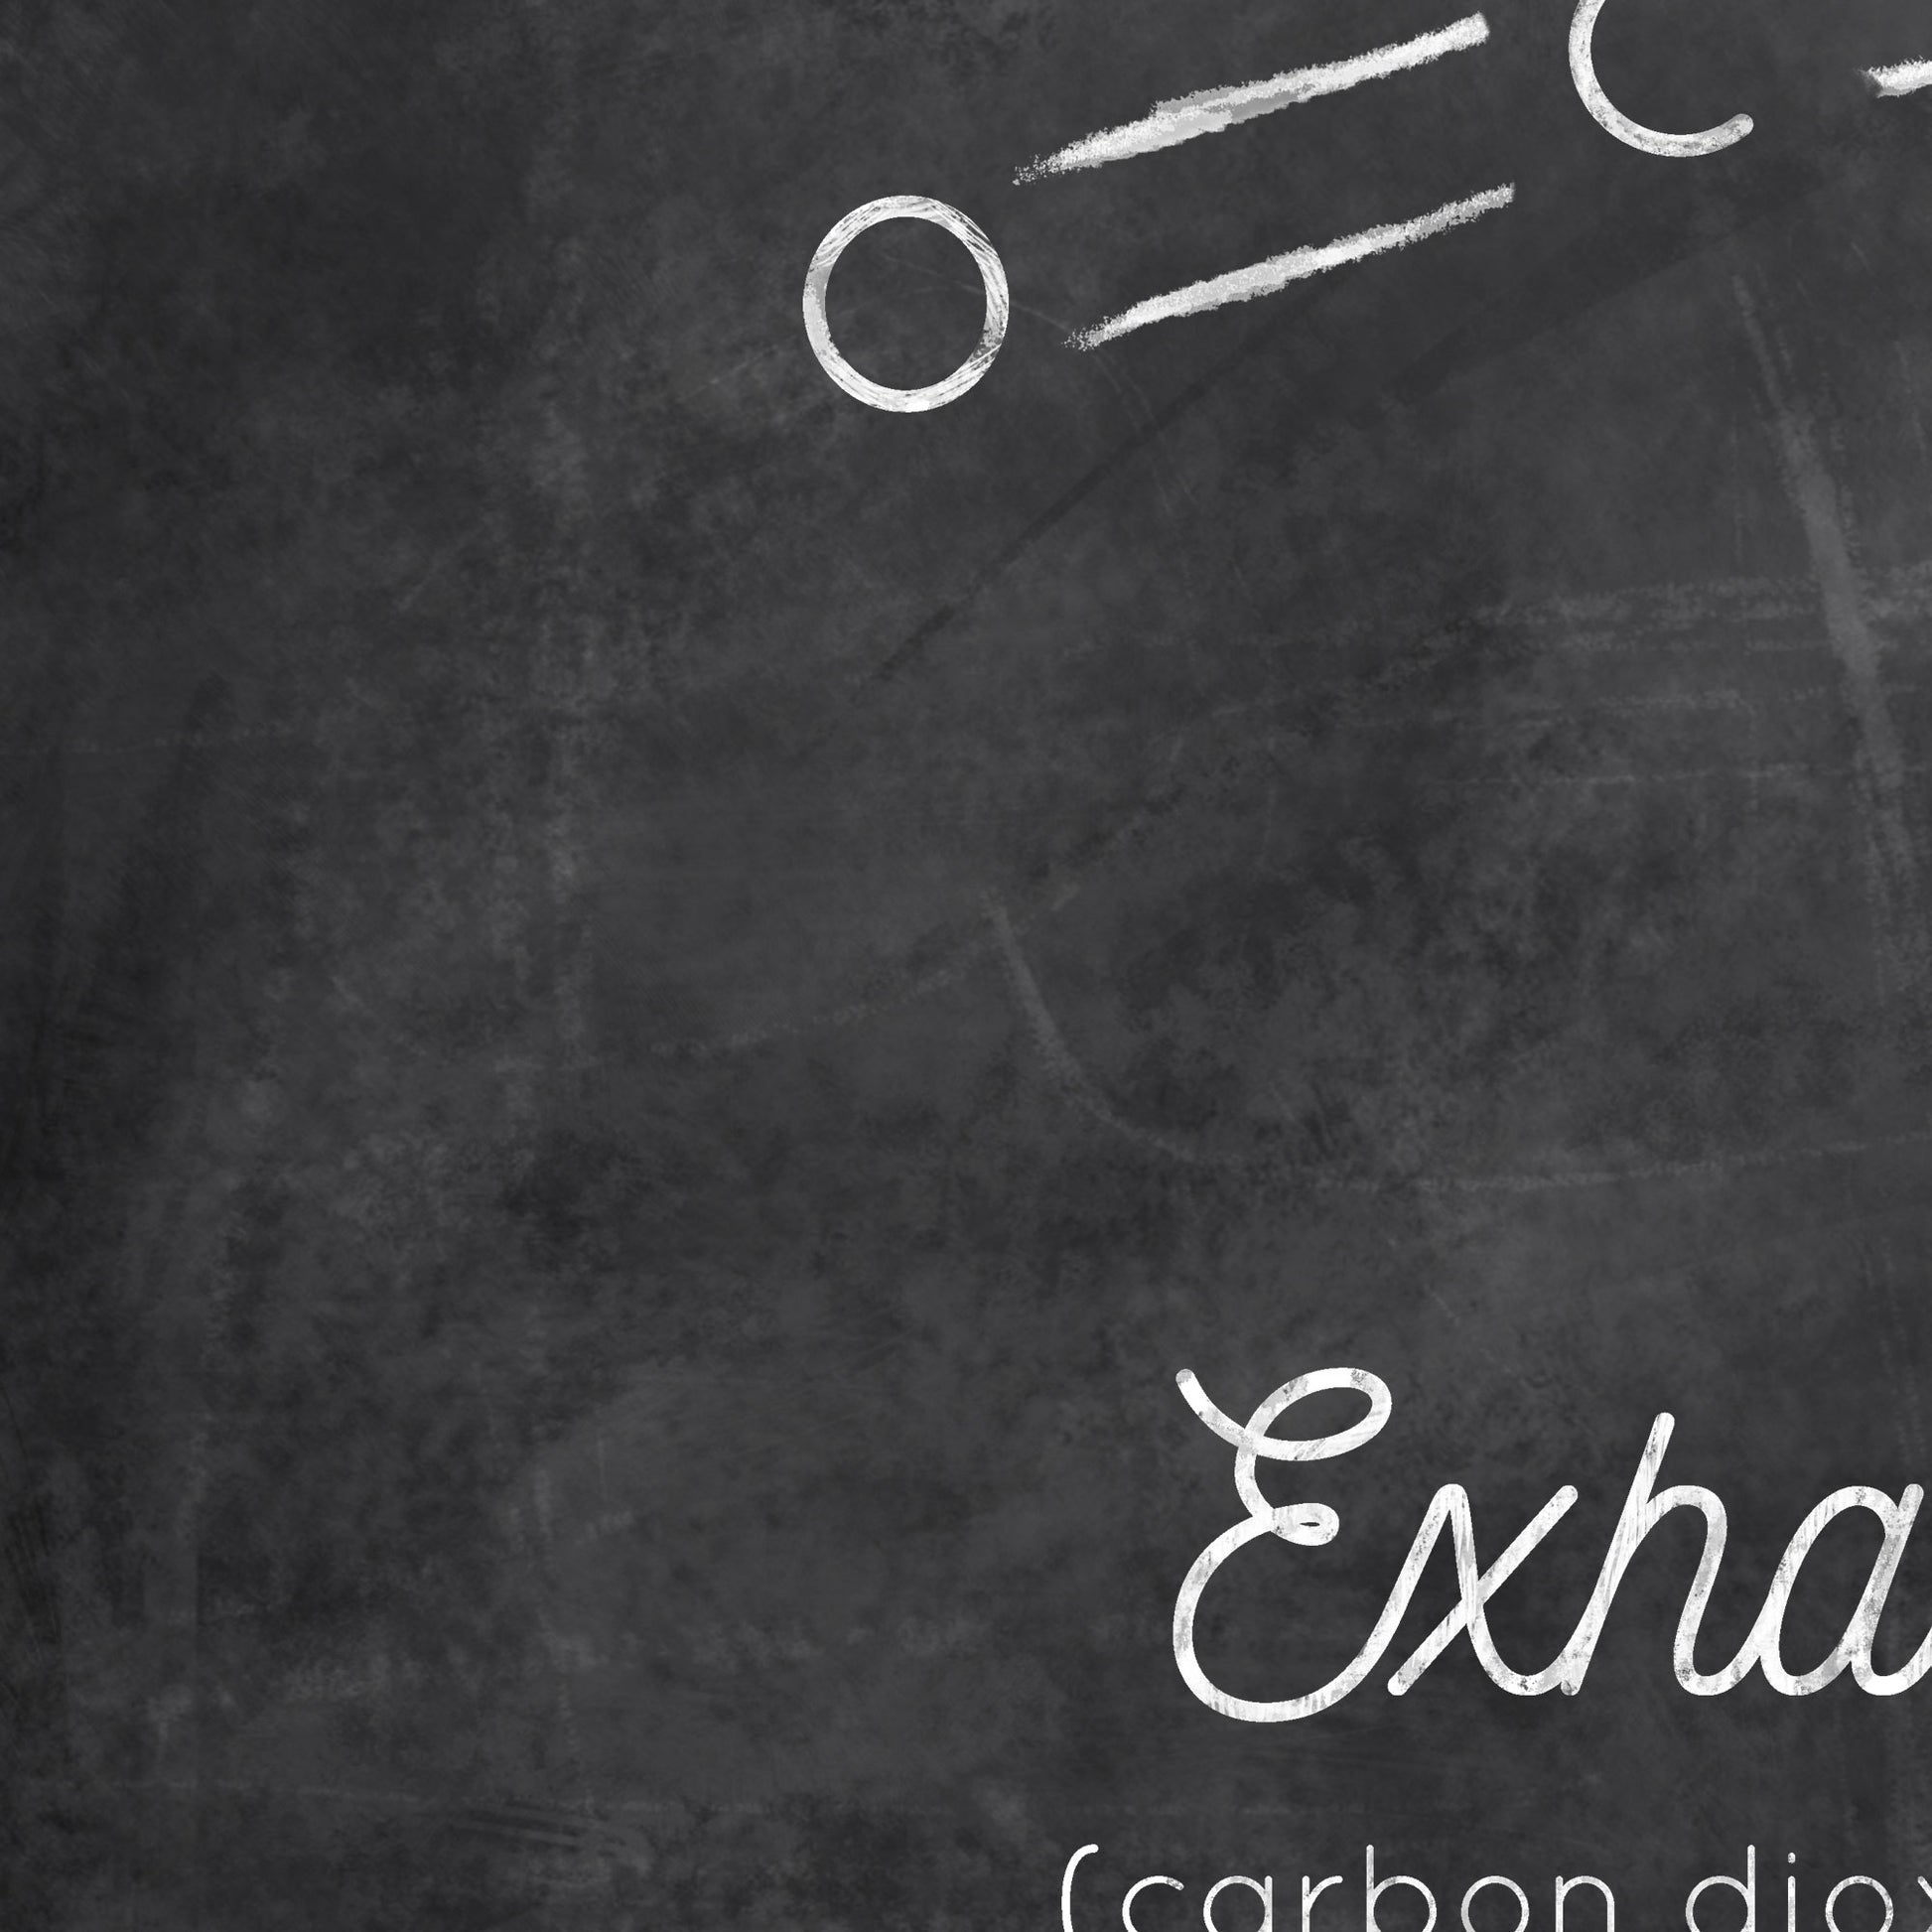 Exhale Distressed Chalkboard Up Close